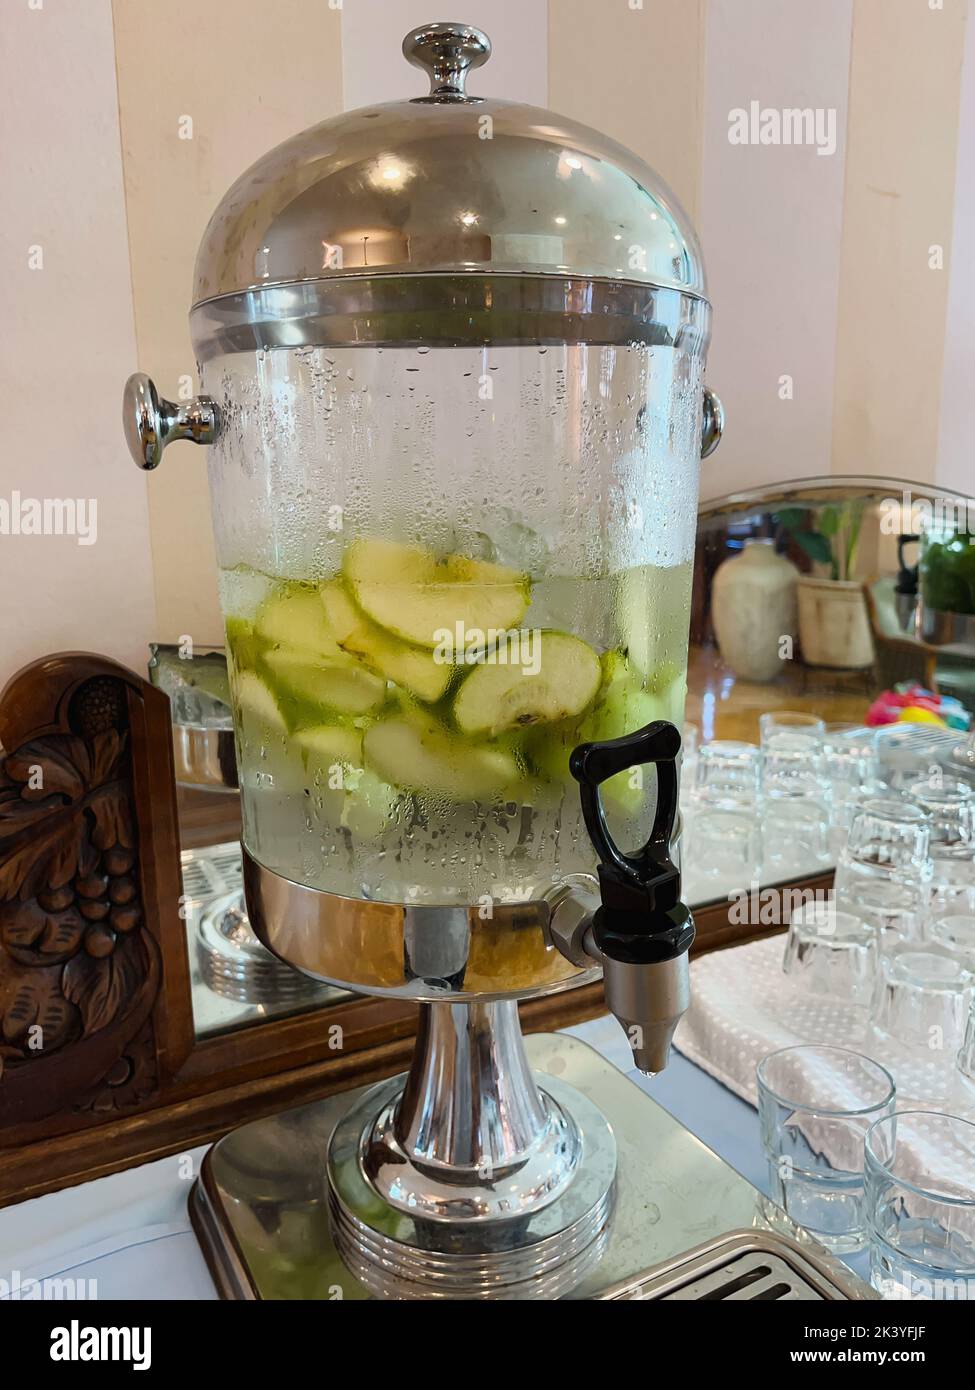 https://c8.alamy.com/comp/2K3YFJF/a-glass-transparent-tank-with-a-tap-with-cold-drinking-water-with-pieces-of-fruit-and-mint-stands-in-the-hotel-lobby-close-up-2K3YFJF.jpg